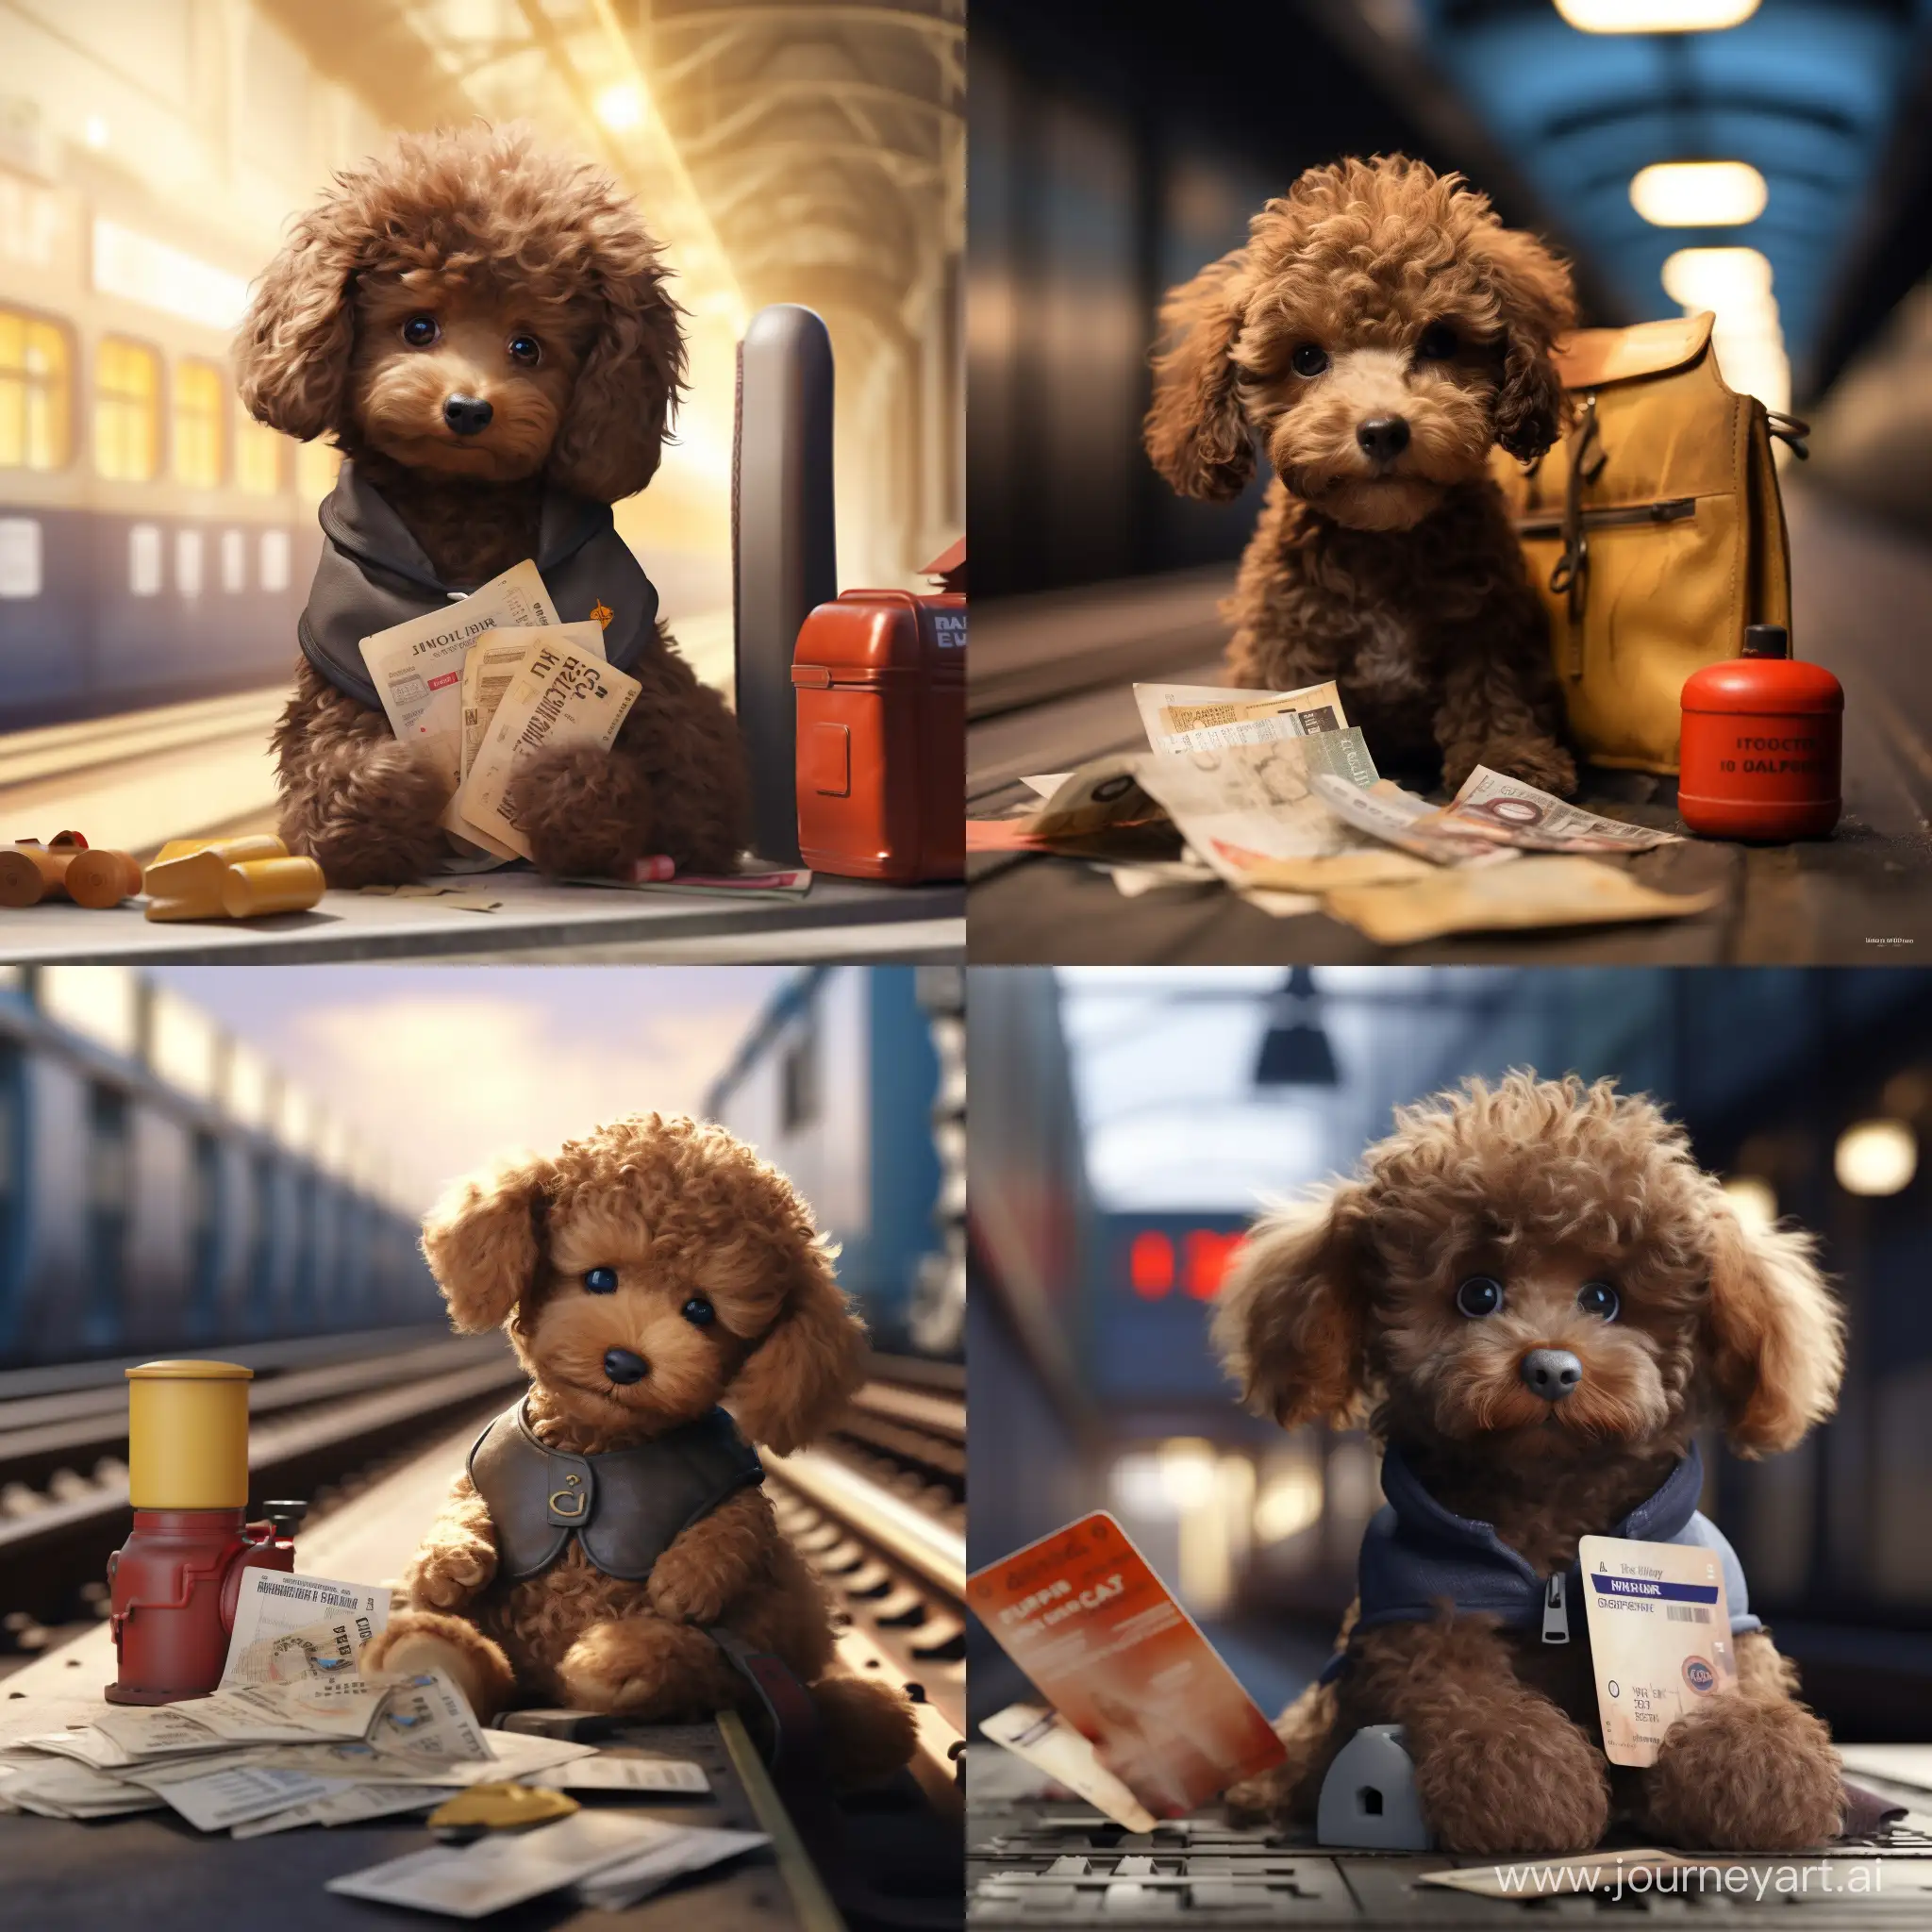 Cute-Toy-Poodle-Puppy-at-City-Train-Station-Holding-a-Ticket